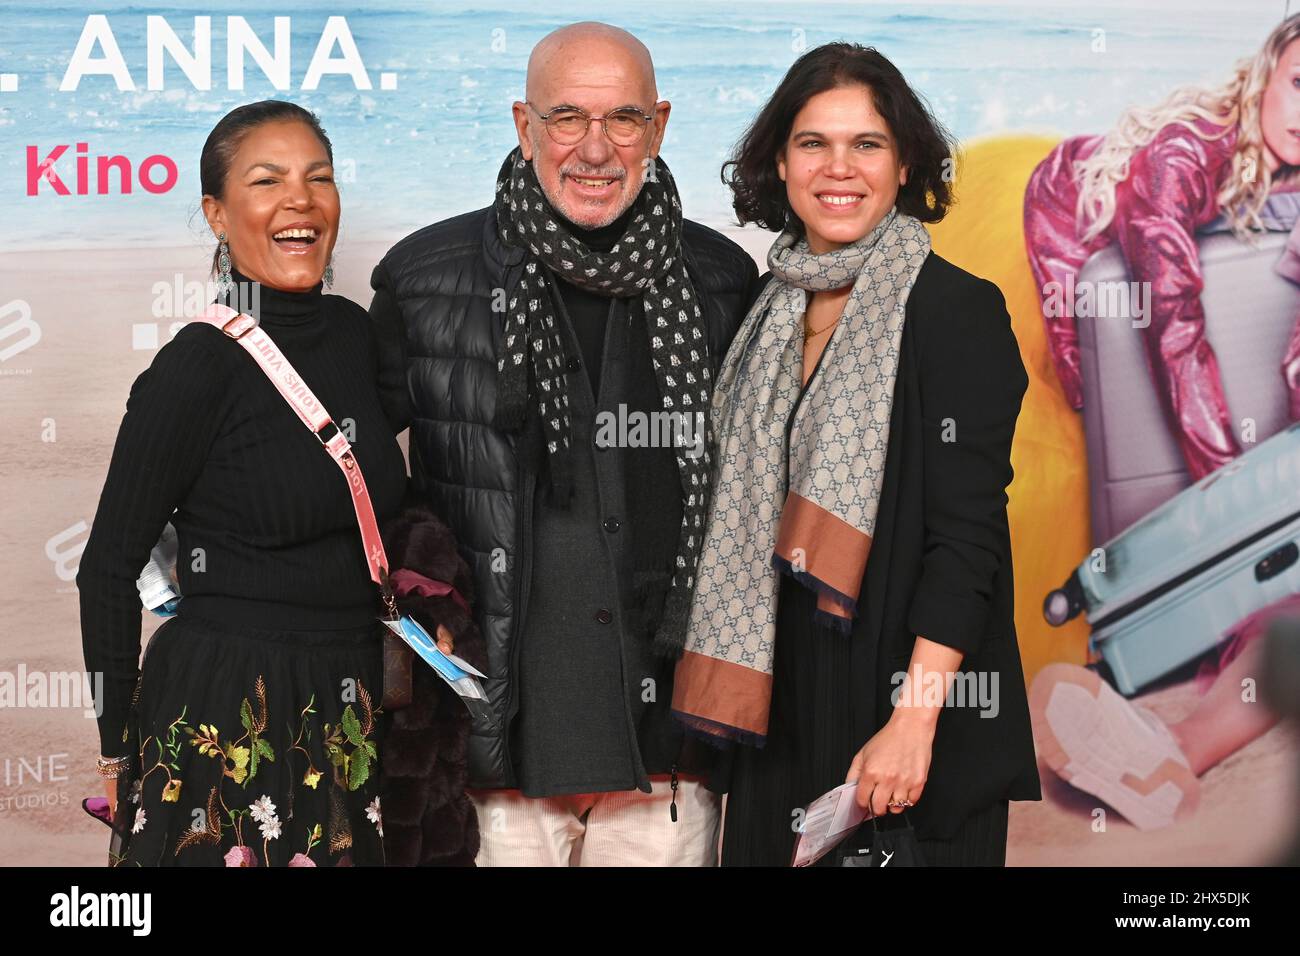 Munich, March 9th, 2022, Otto RETZER (actor and director), with wife Shirley and daughter Olivia. World premiere JGA Jasmin, Gina, Anna on March 9th, 2022 in the Mathaeser cinema in Munich. Stock Photo